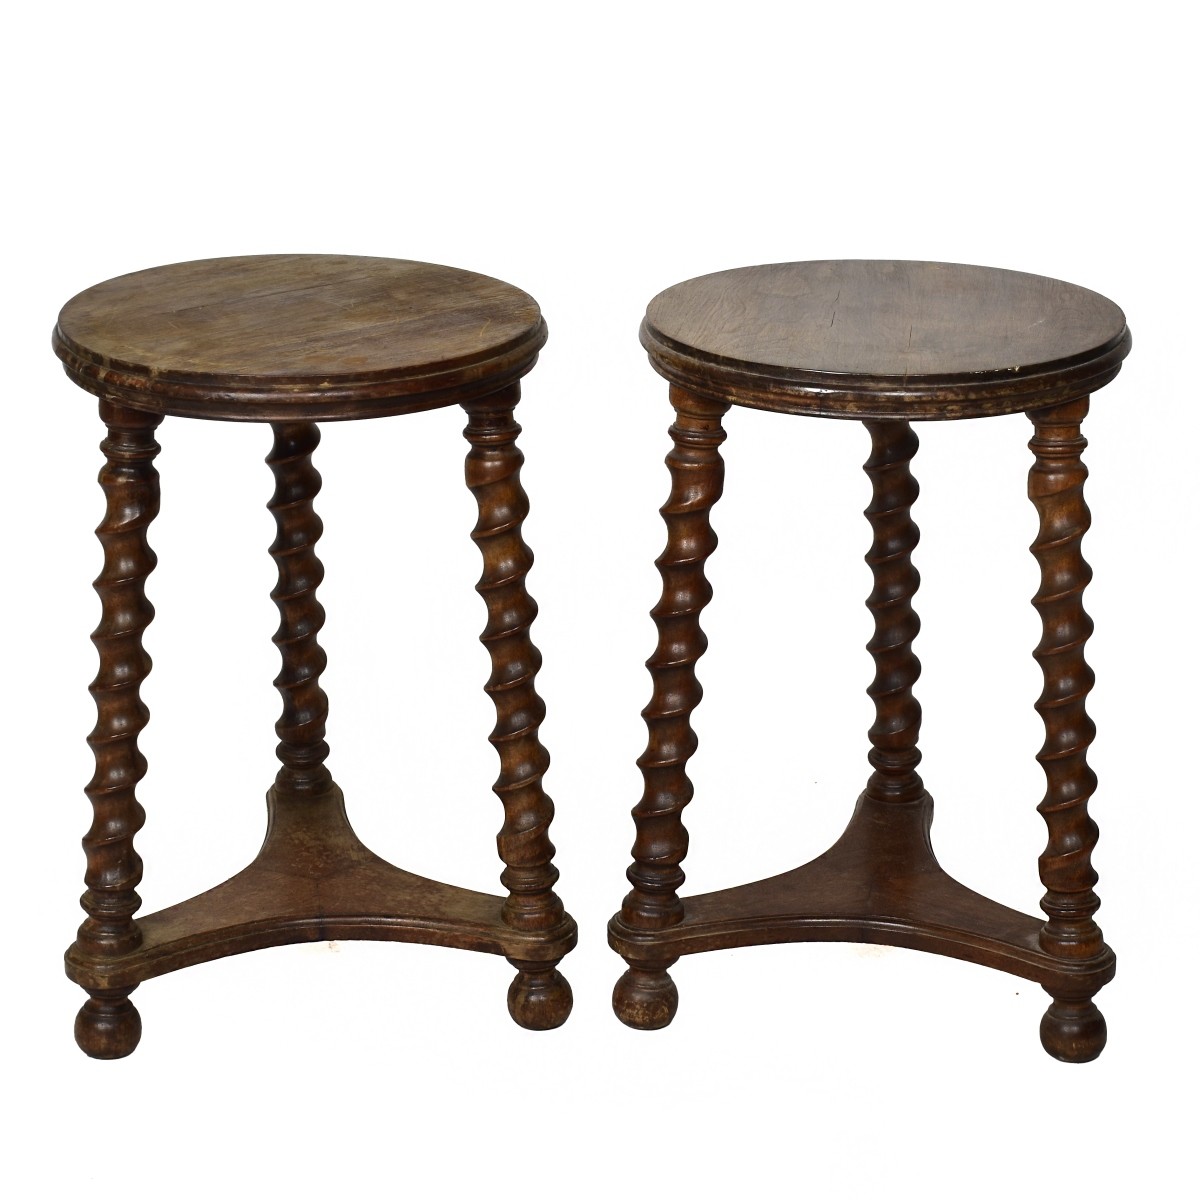 Pair of Antique Carved Oak End Tables